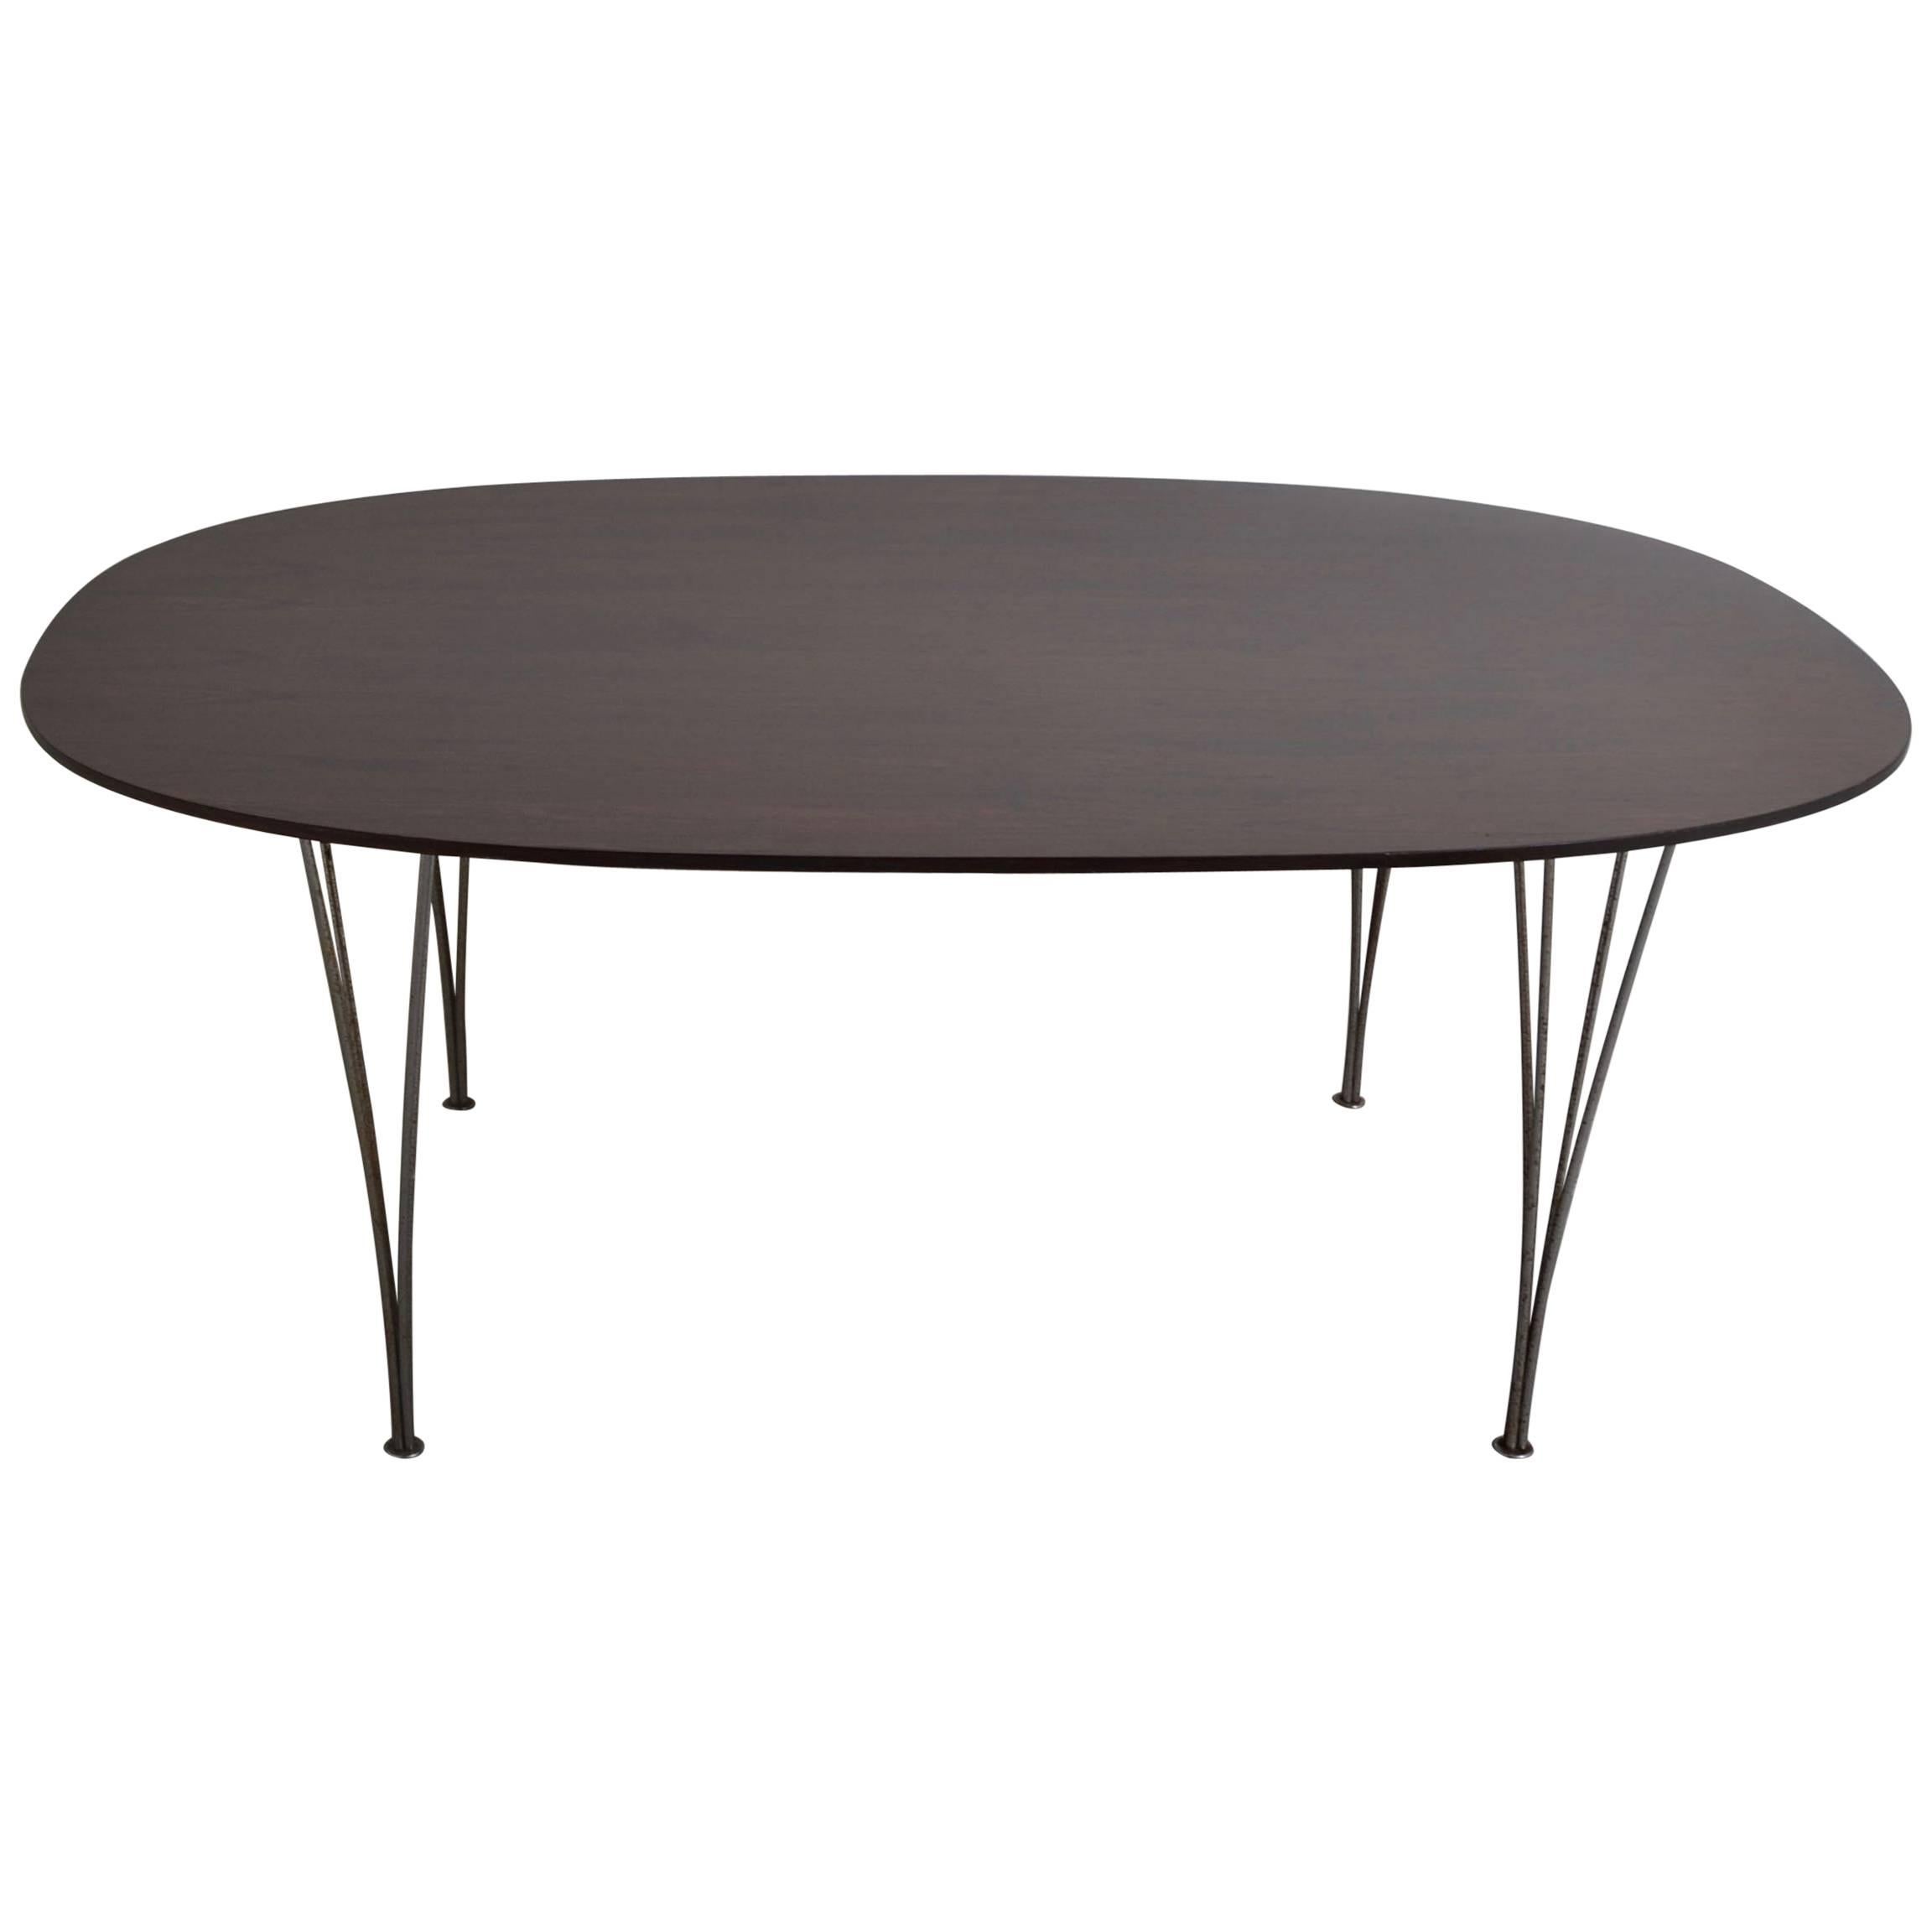 Super Ellipse Dining Table by Piet Hein and Bruno Mathsson, Denmark 1974 For Sale